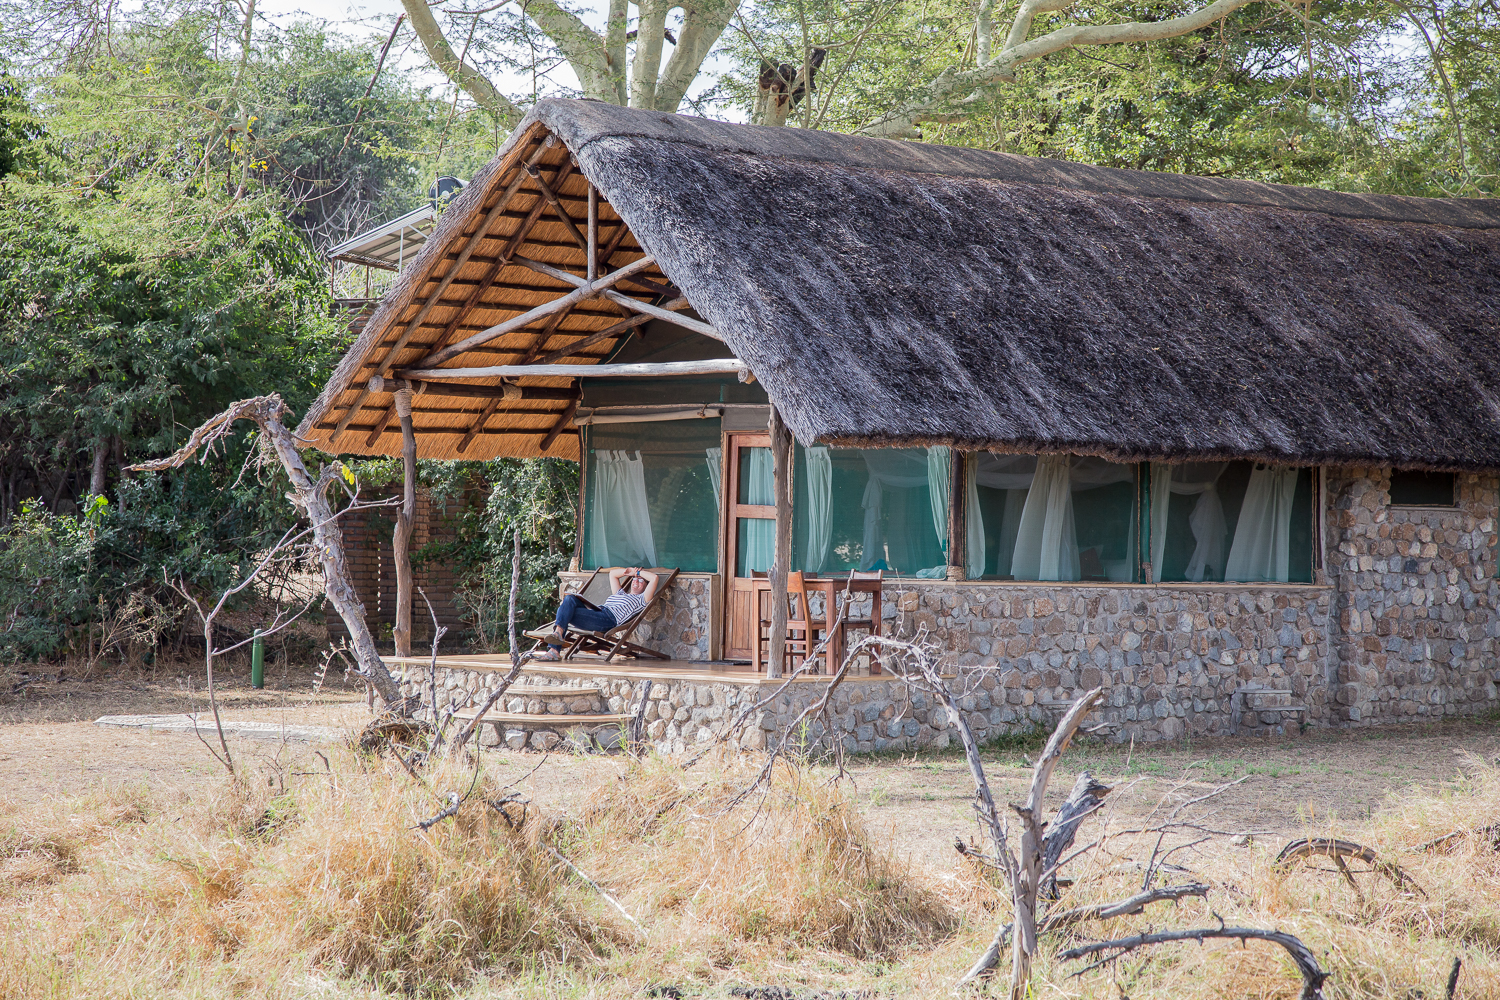  Our chalet at Mvuu Camp. We could watch the hippos eating grass in our front yard around midnight. 